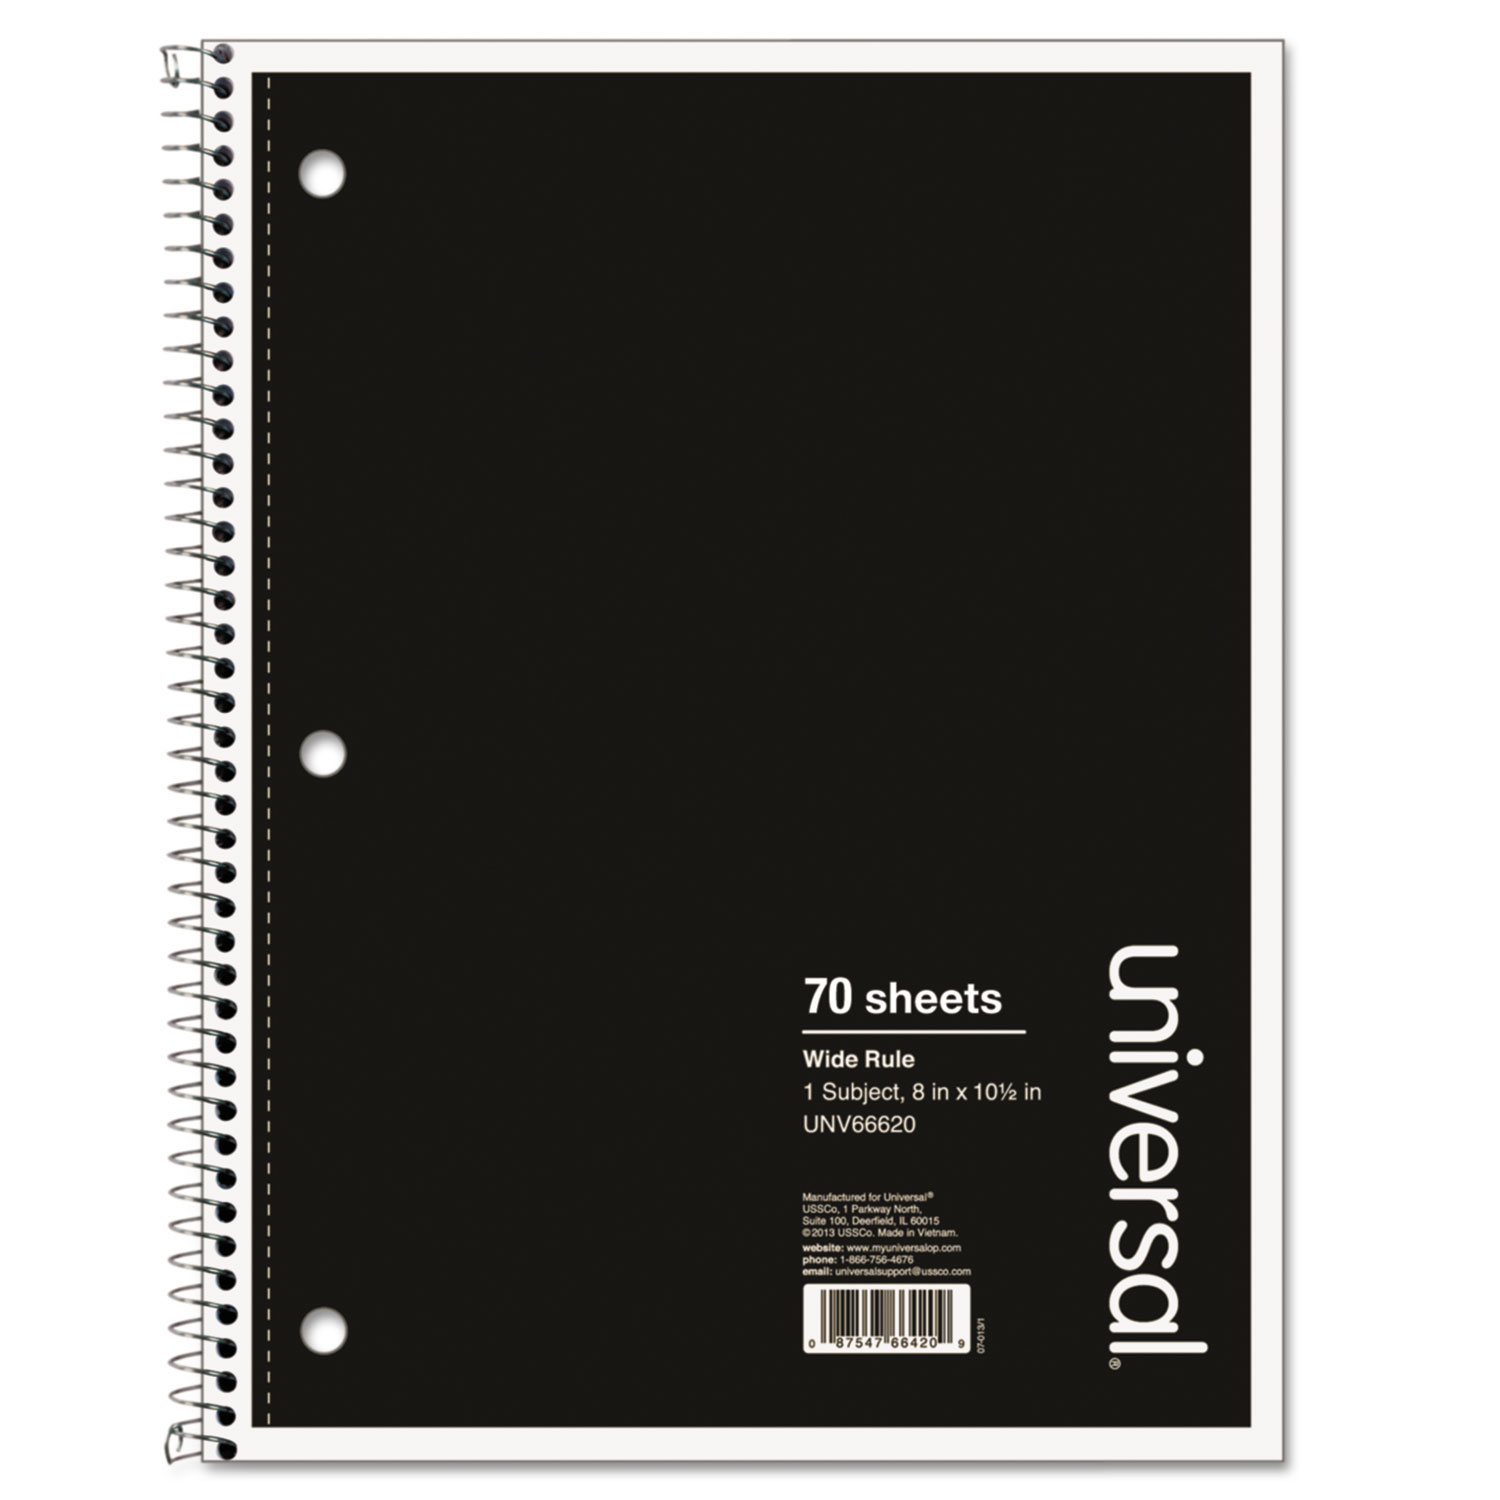 1 Sub. Wirebound Notebook, 10 1/2 x 8, Wide Rule, 70 Sheets, Black Cover